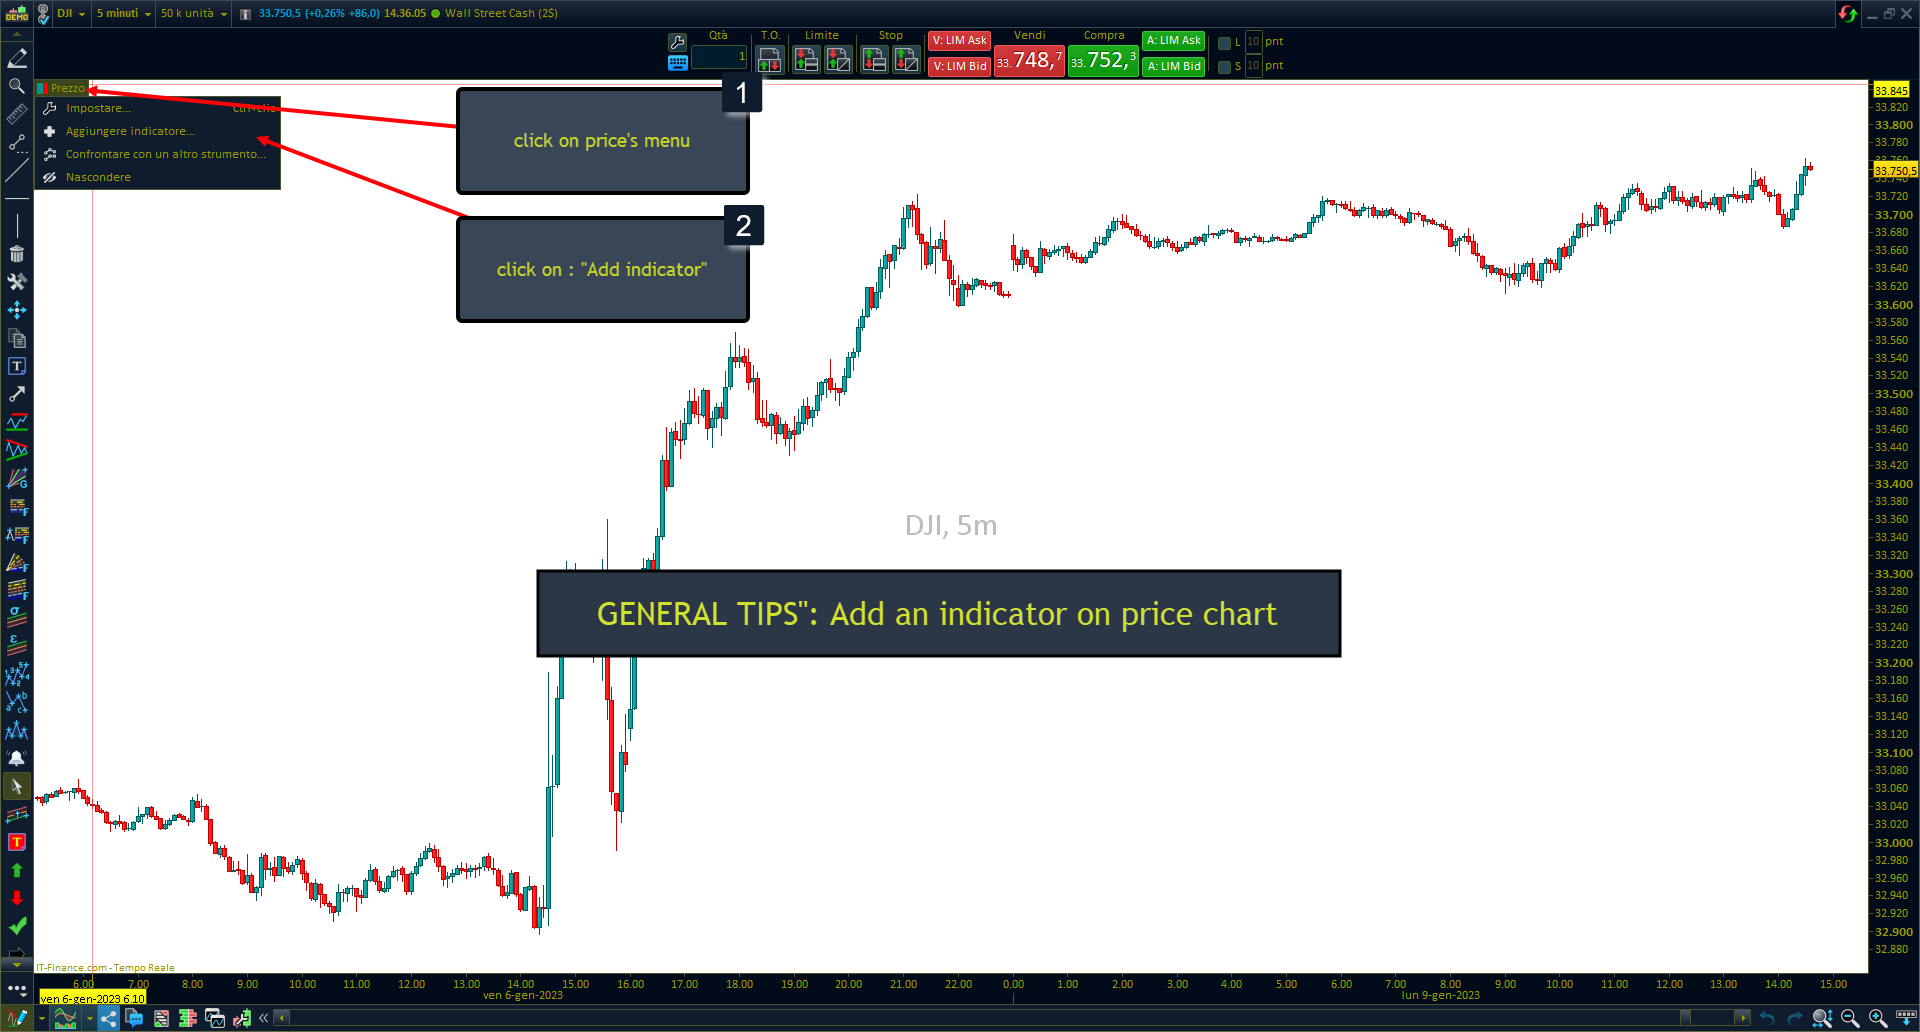 HOW TO ADD INDICATOR ON PRICE CHART PROREALTIME